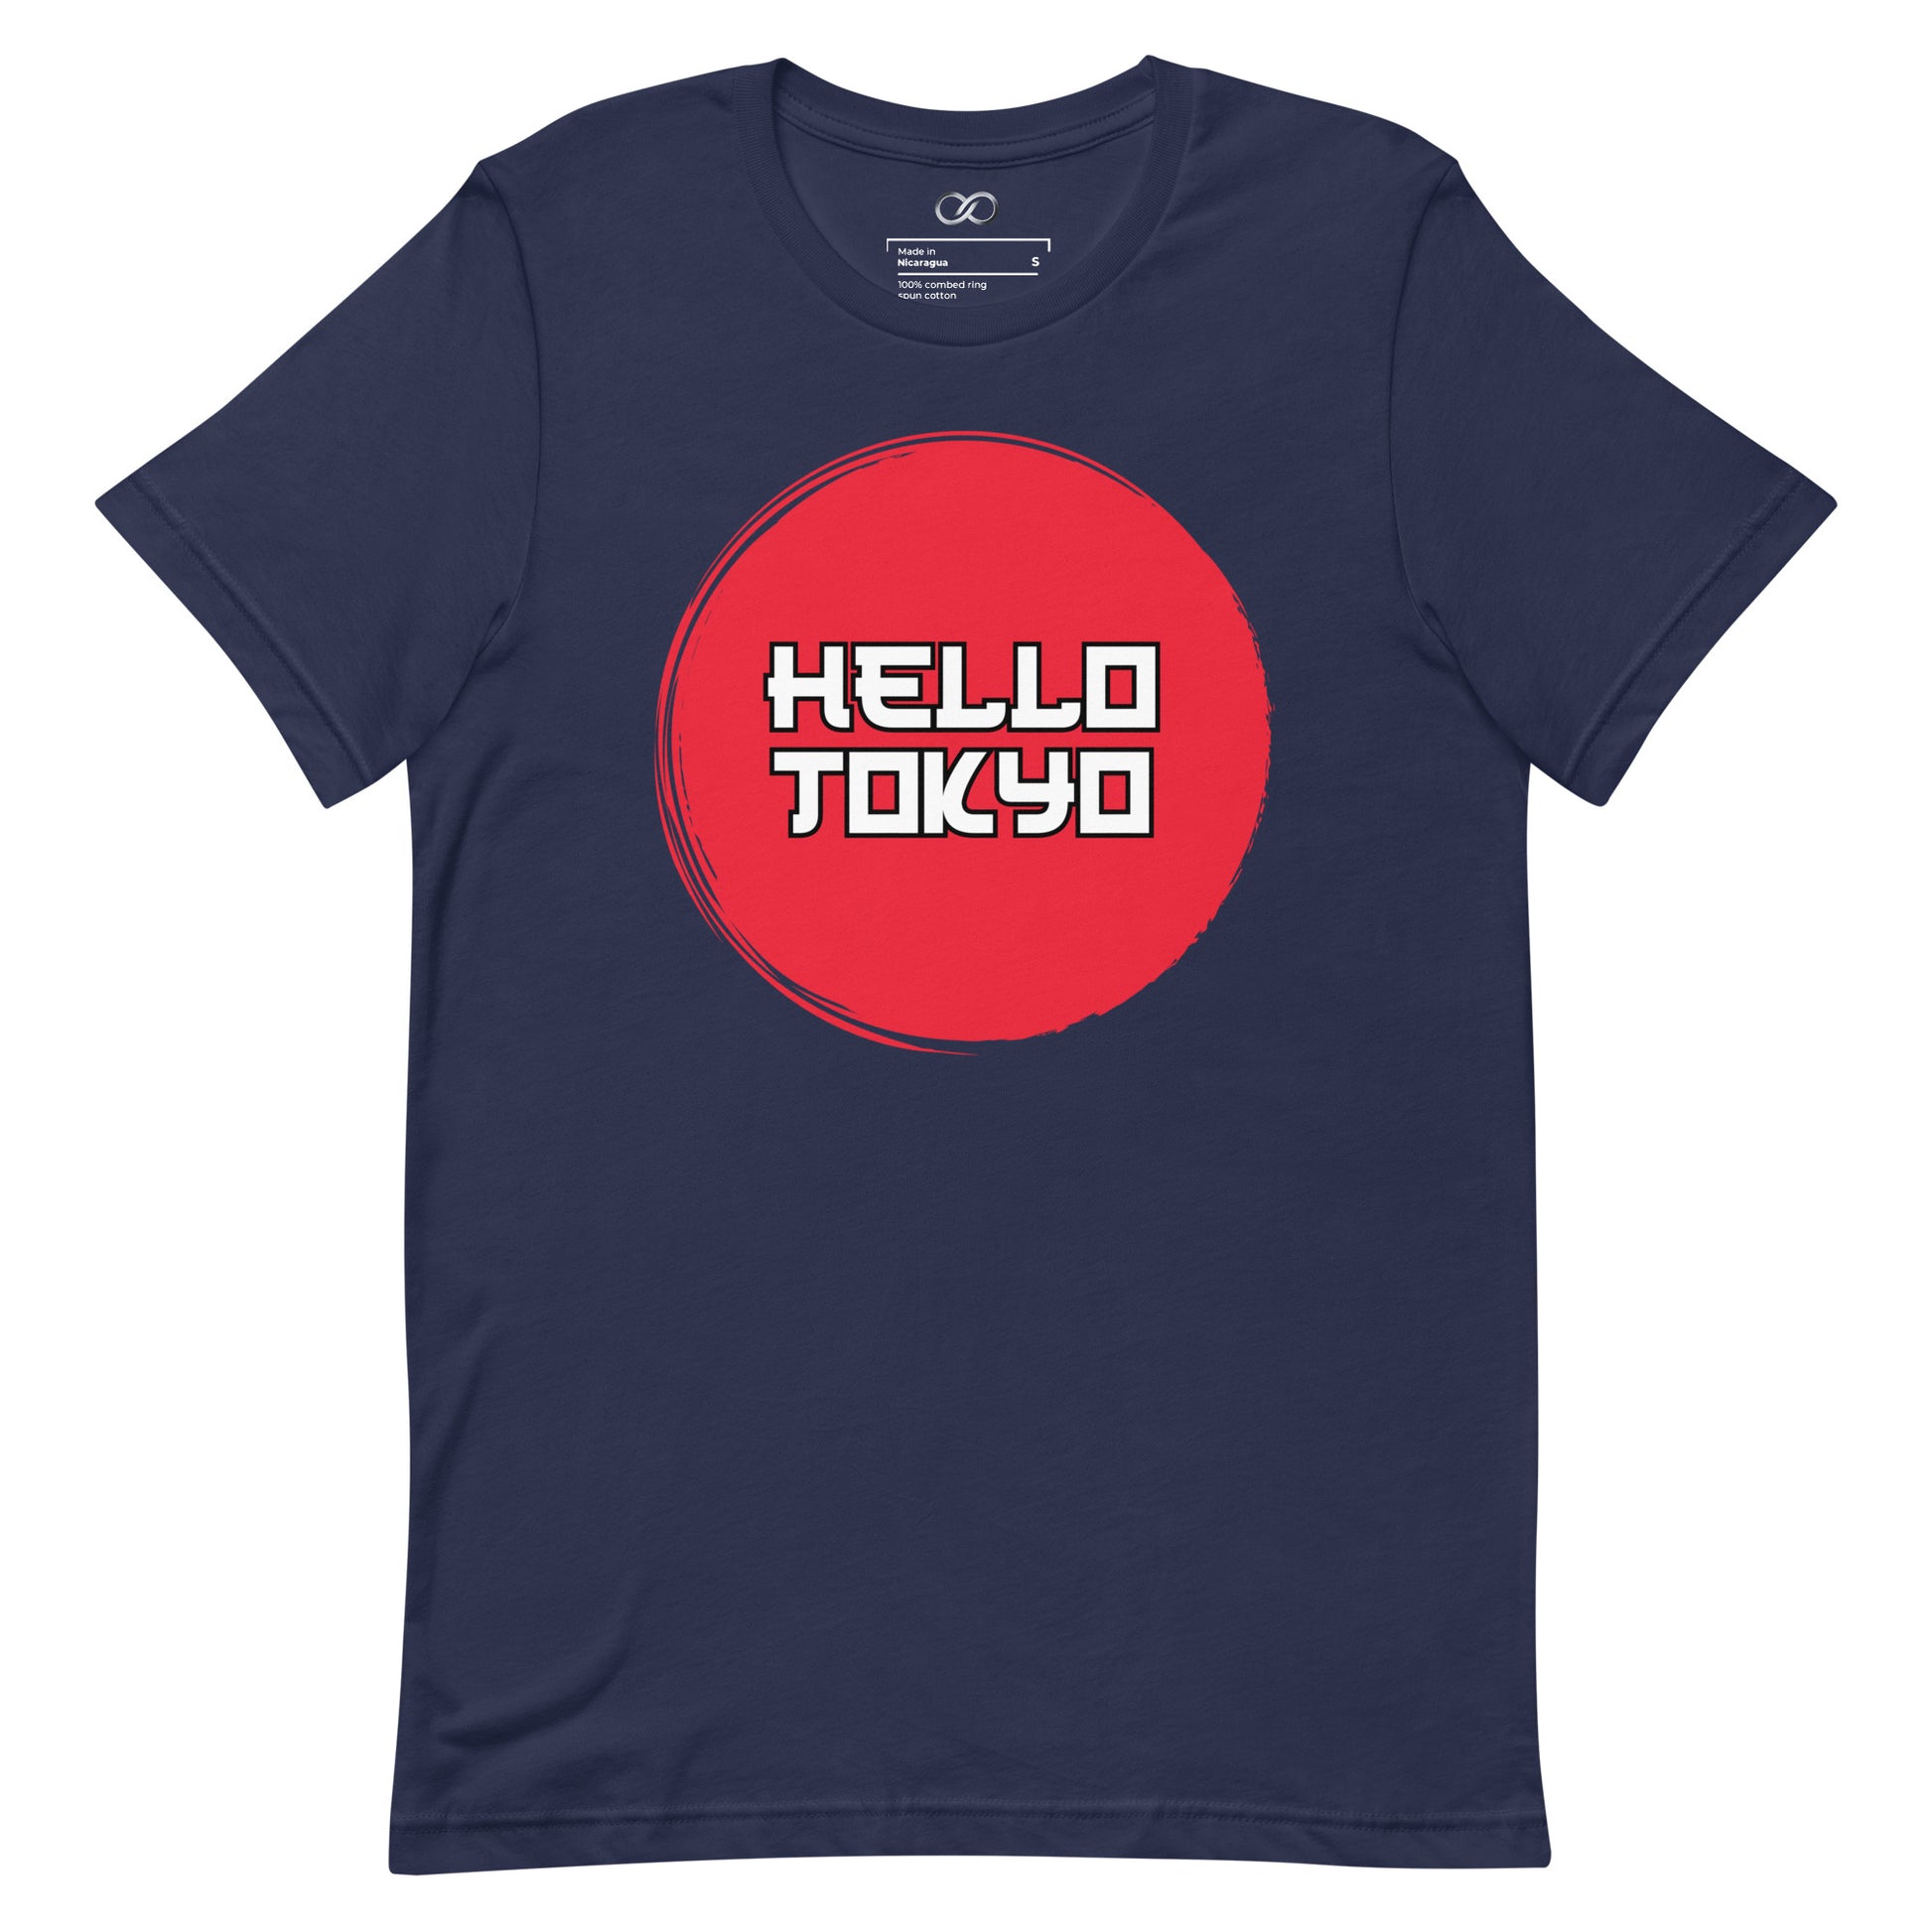 A full view of a navy blue t-shirt with 'Hello Tokyo' text inside a striking red circle, laid flat to display the design.